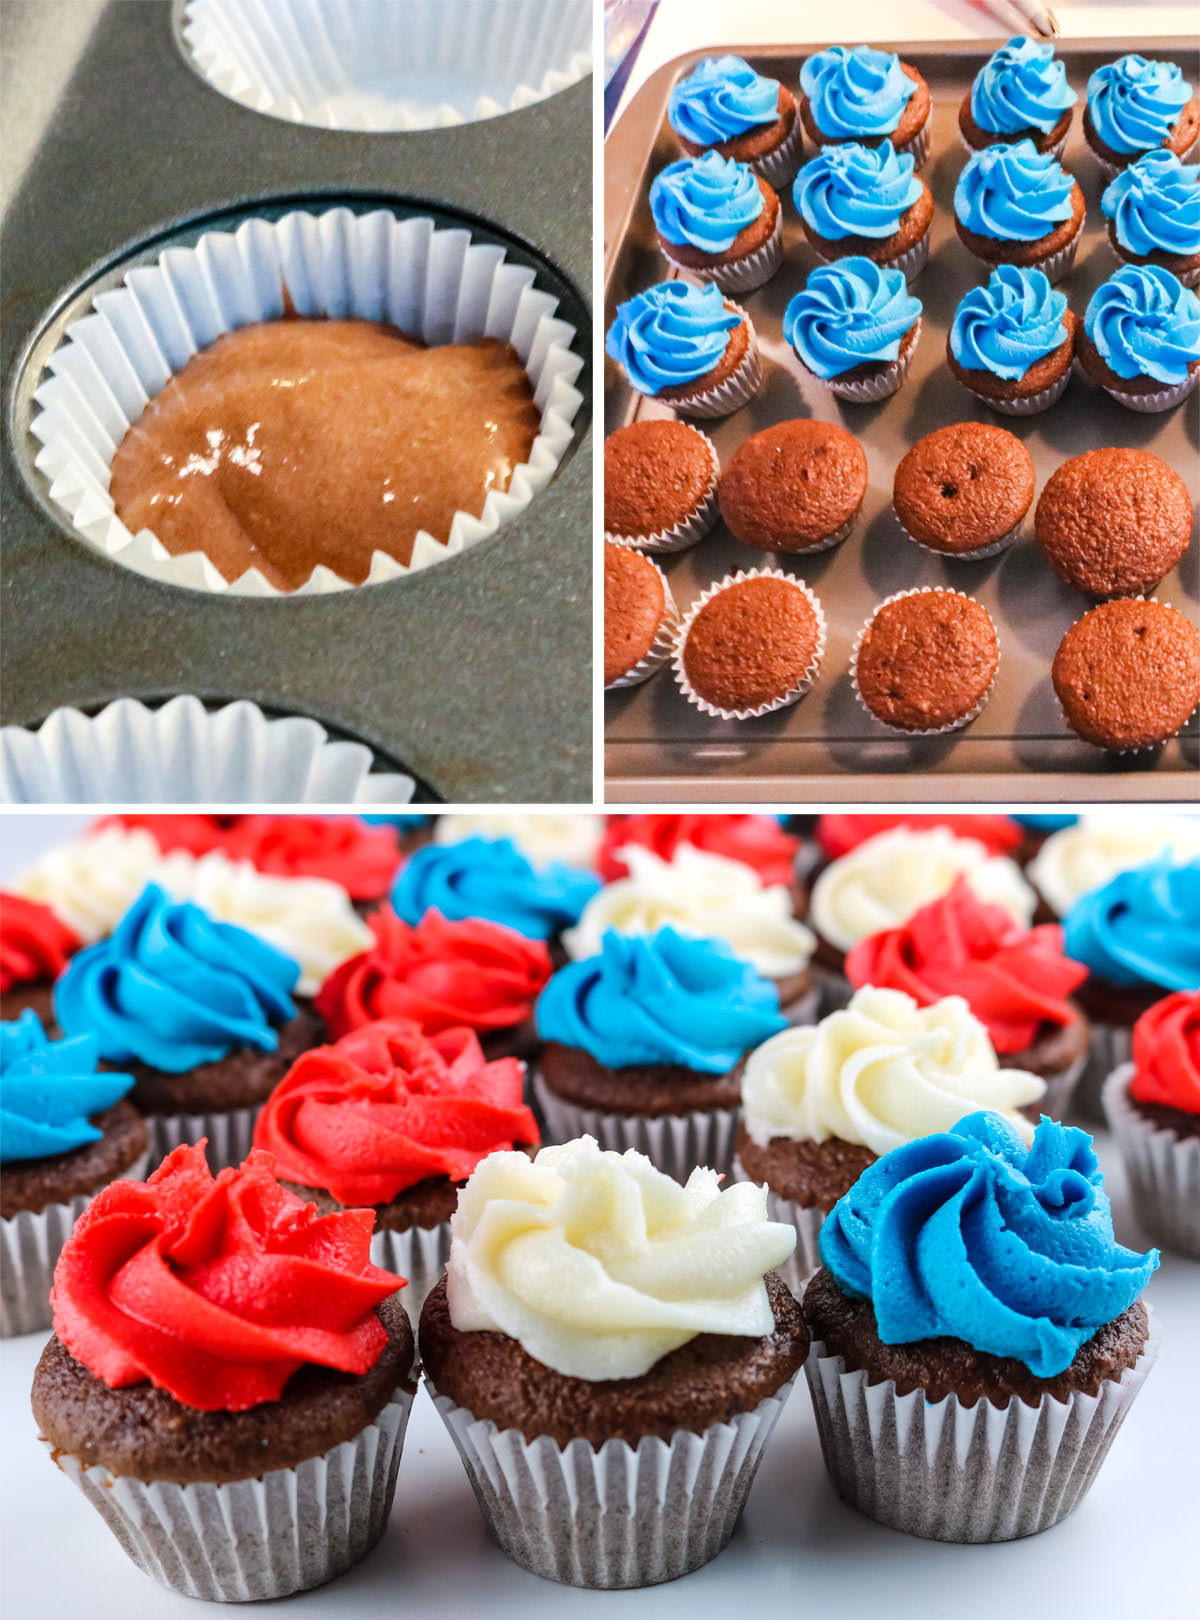 Collage image showing the steps required to make Red White and Blue Mini Cupcakes.